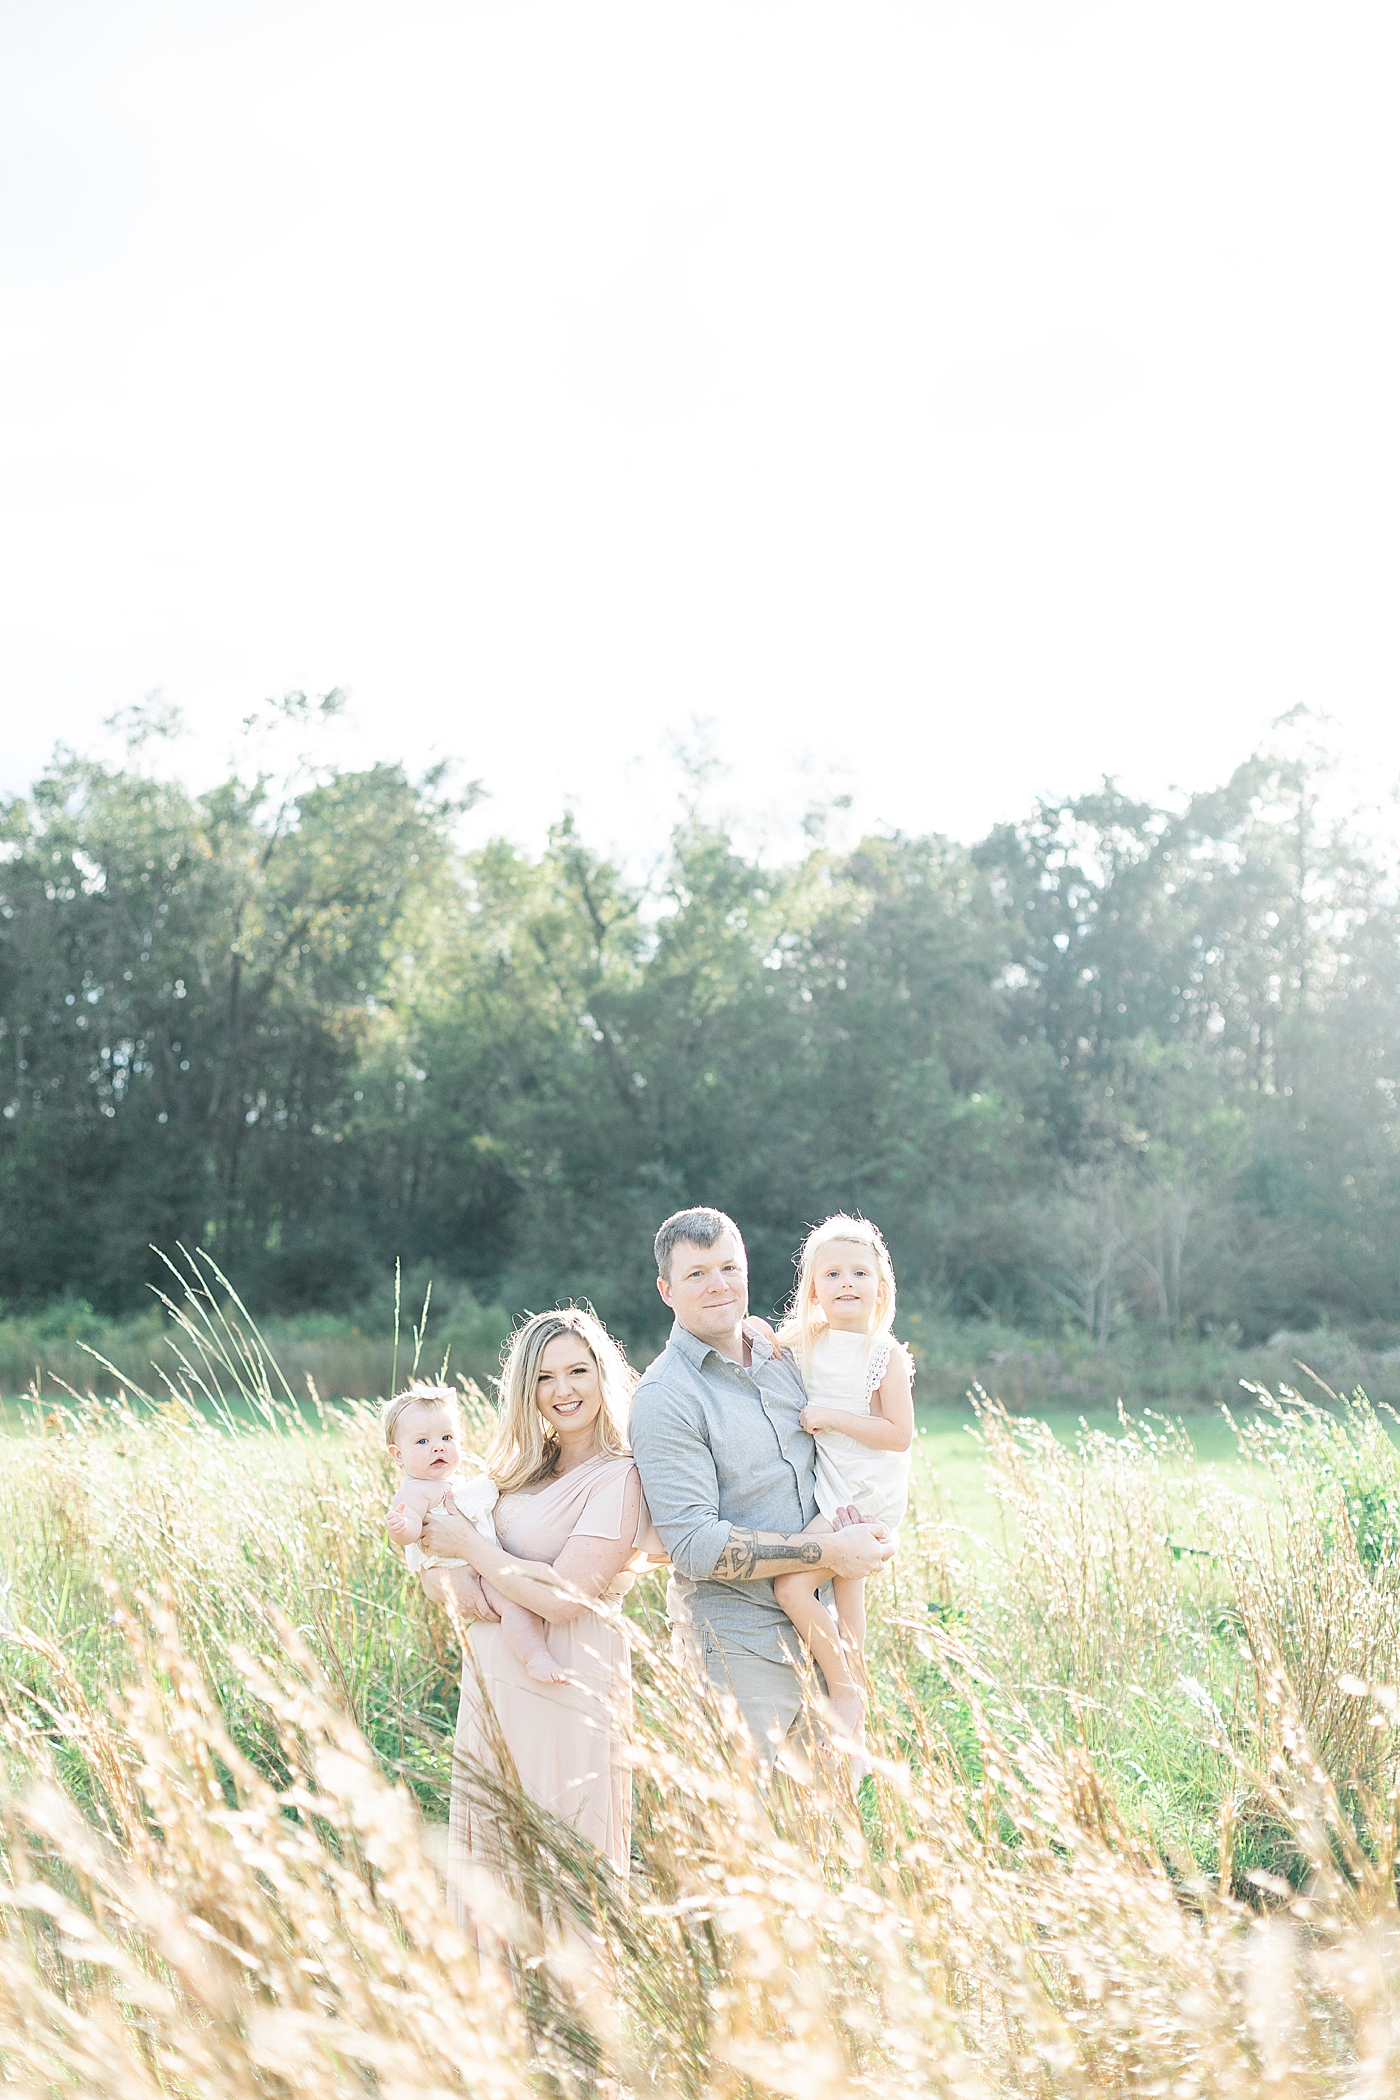 Family of four standing together in a field | Photo by Little Sunshine Photography 